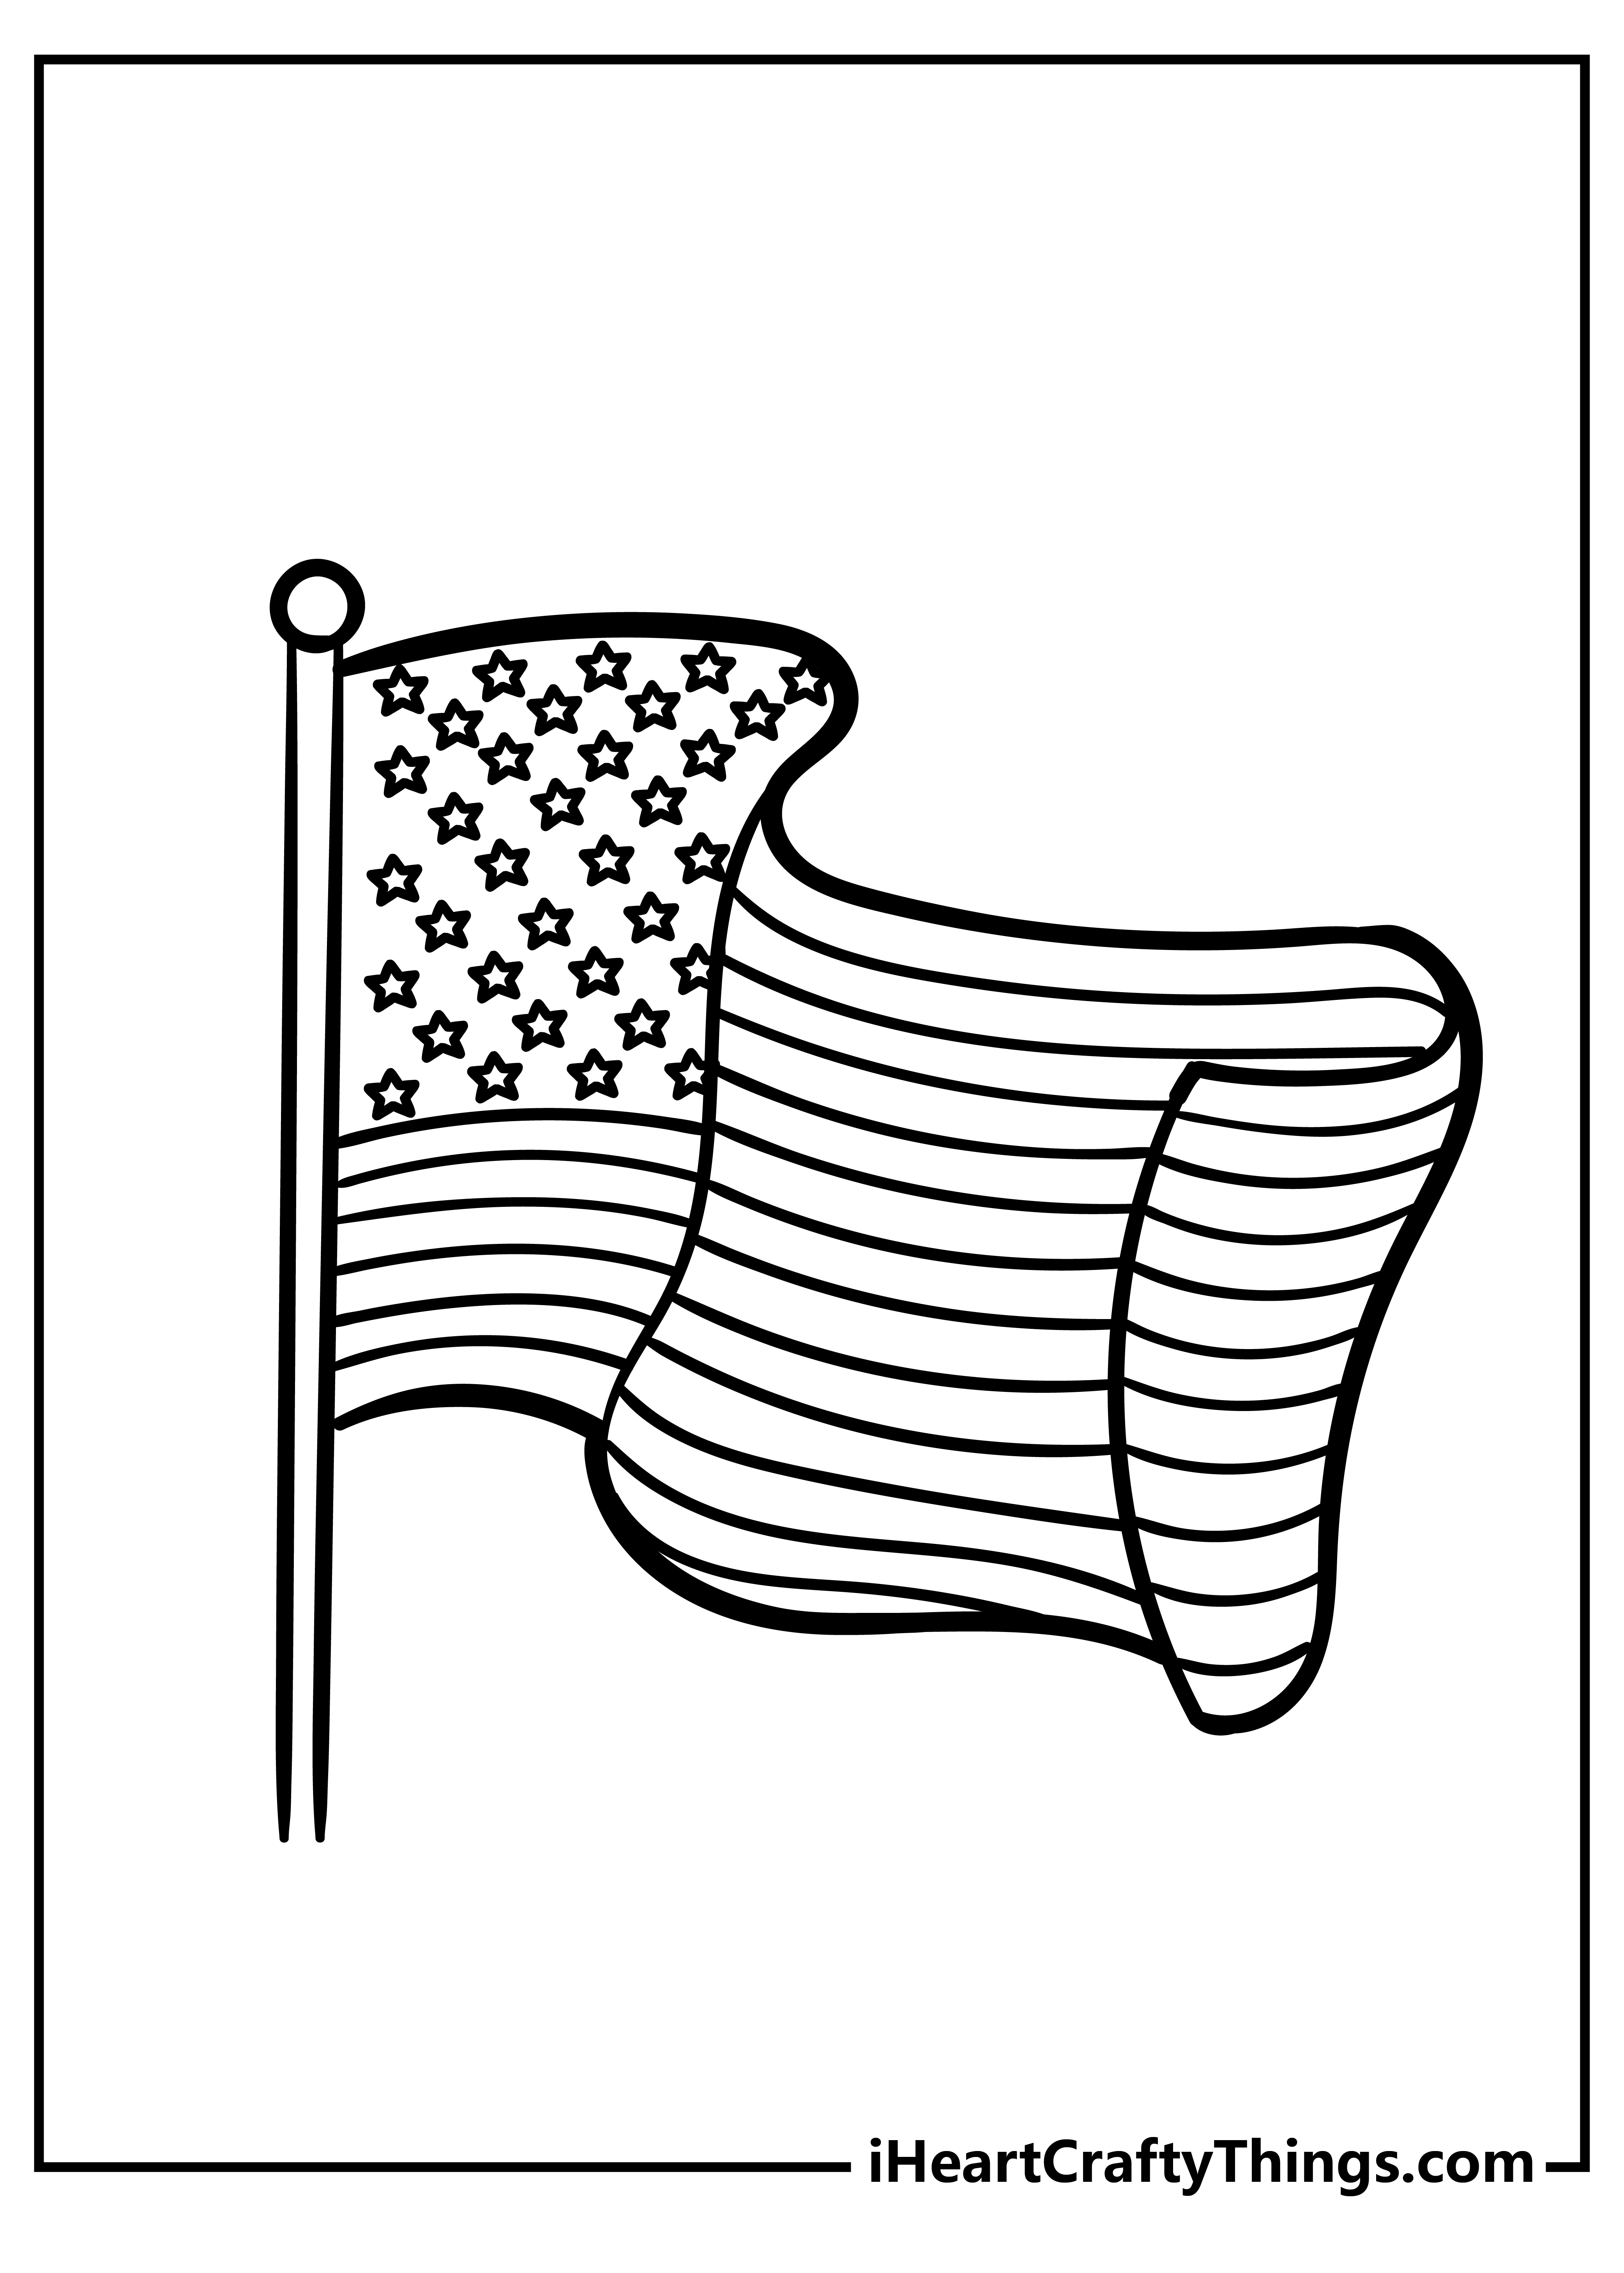 American Flag Coloring Pages for preschoolers free printable